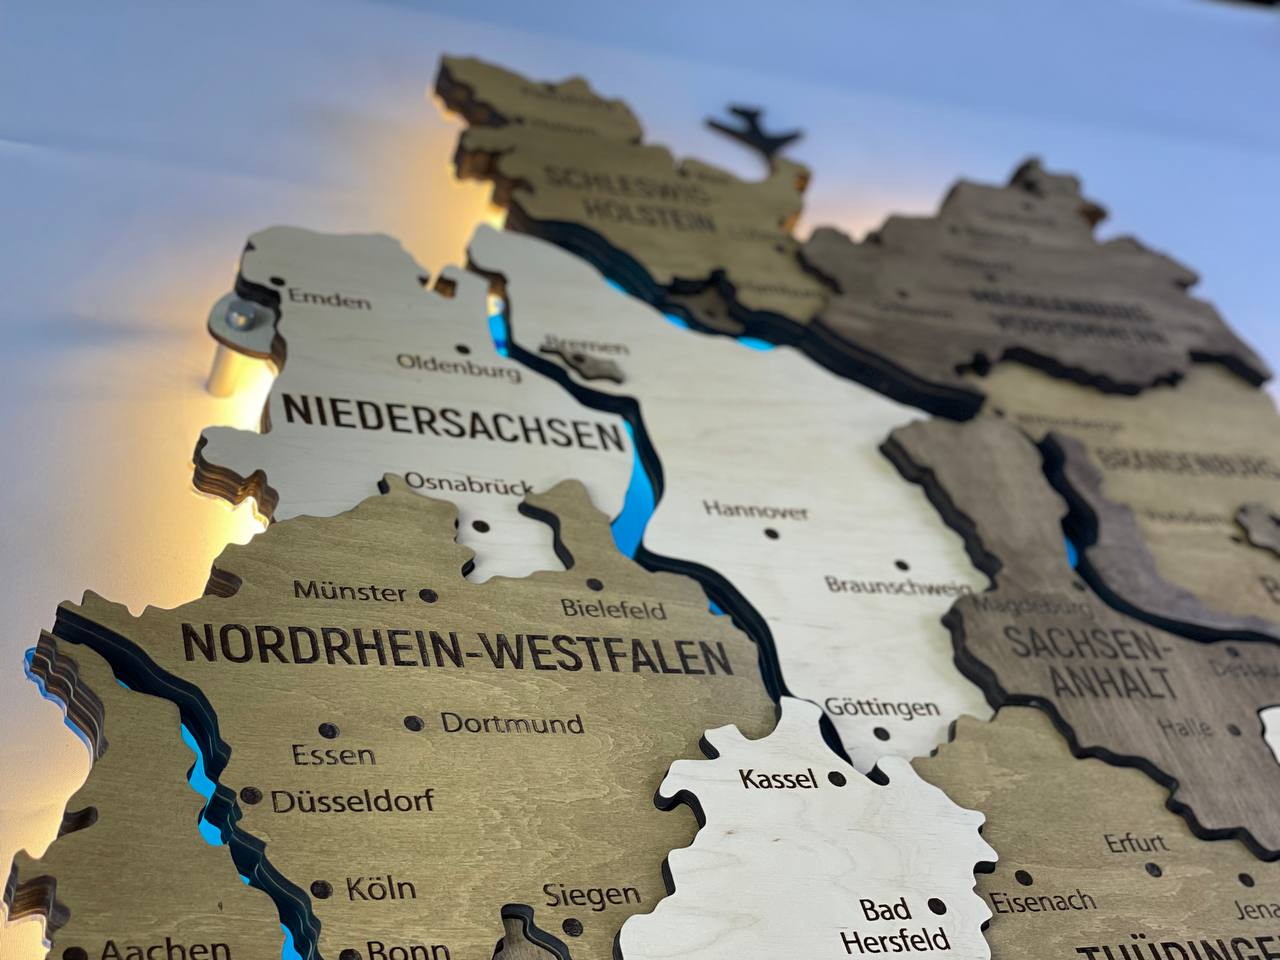 Acrylic Map of Germany with Rivers Wonder Color